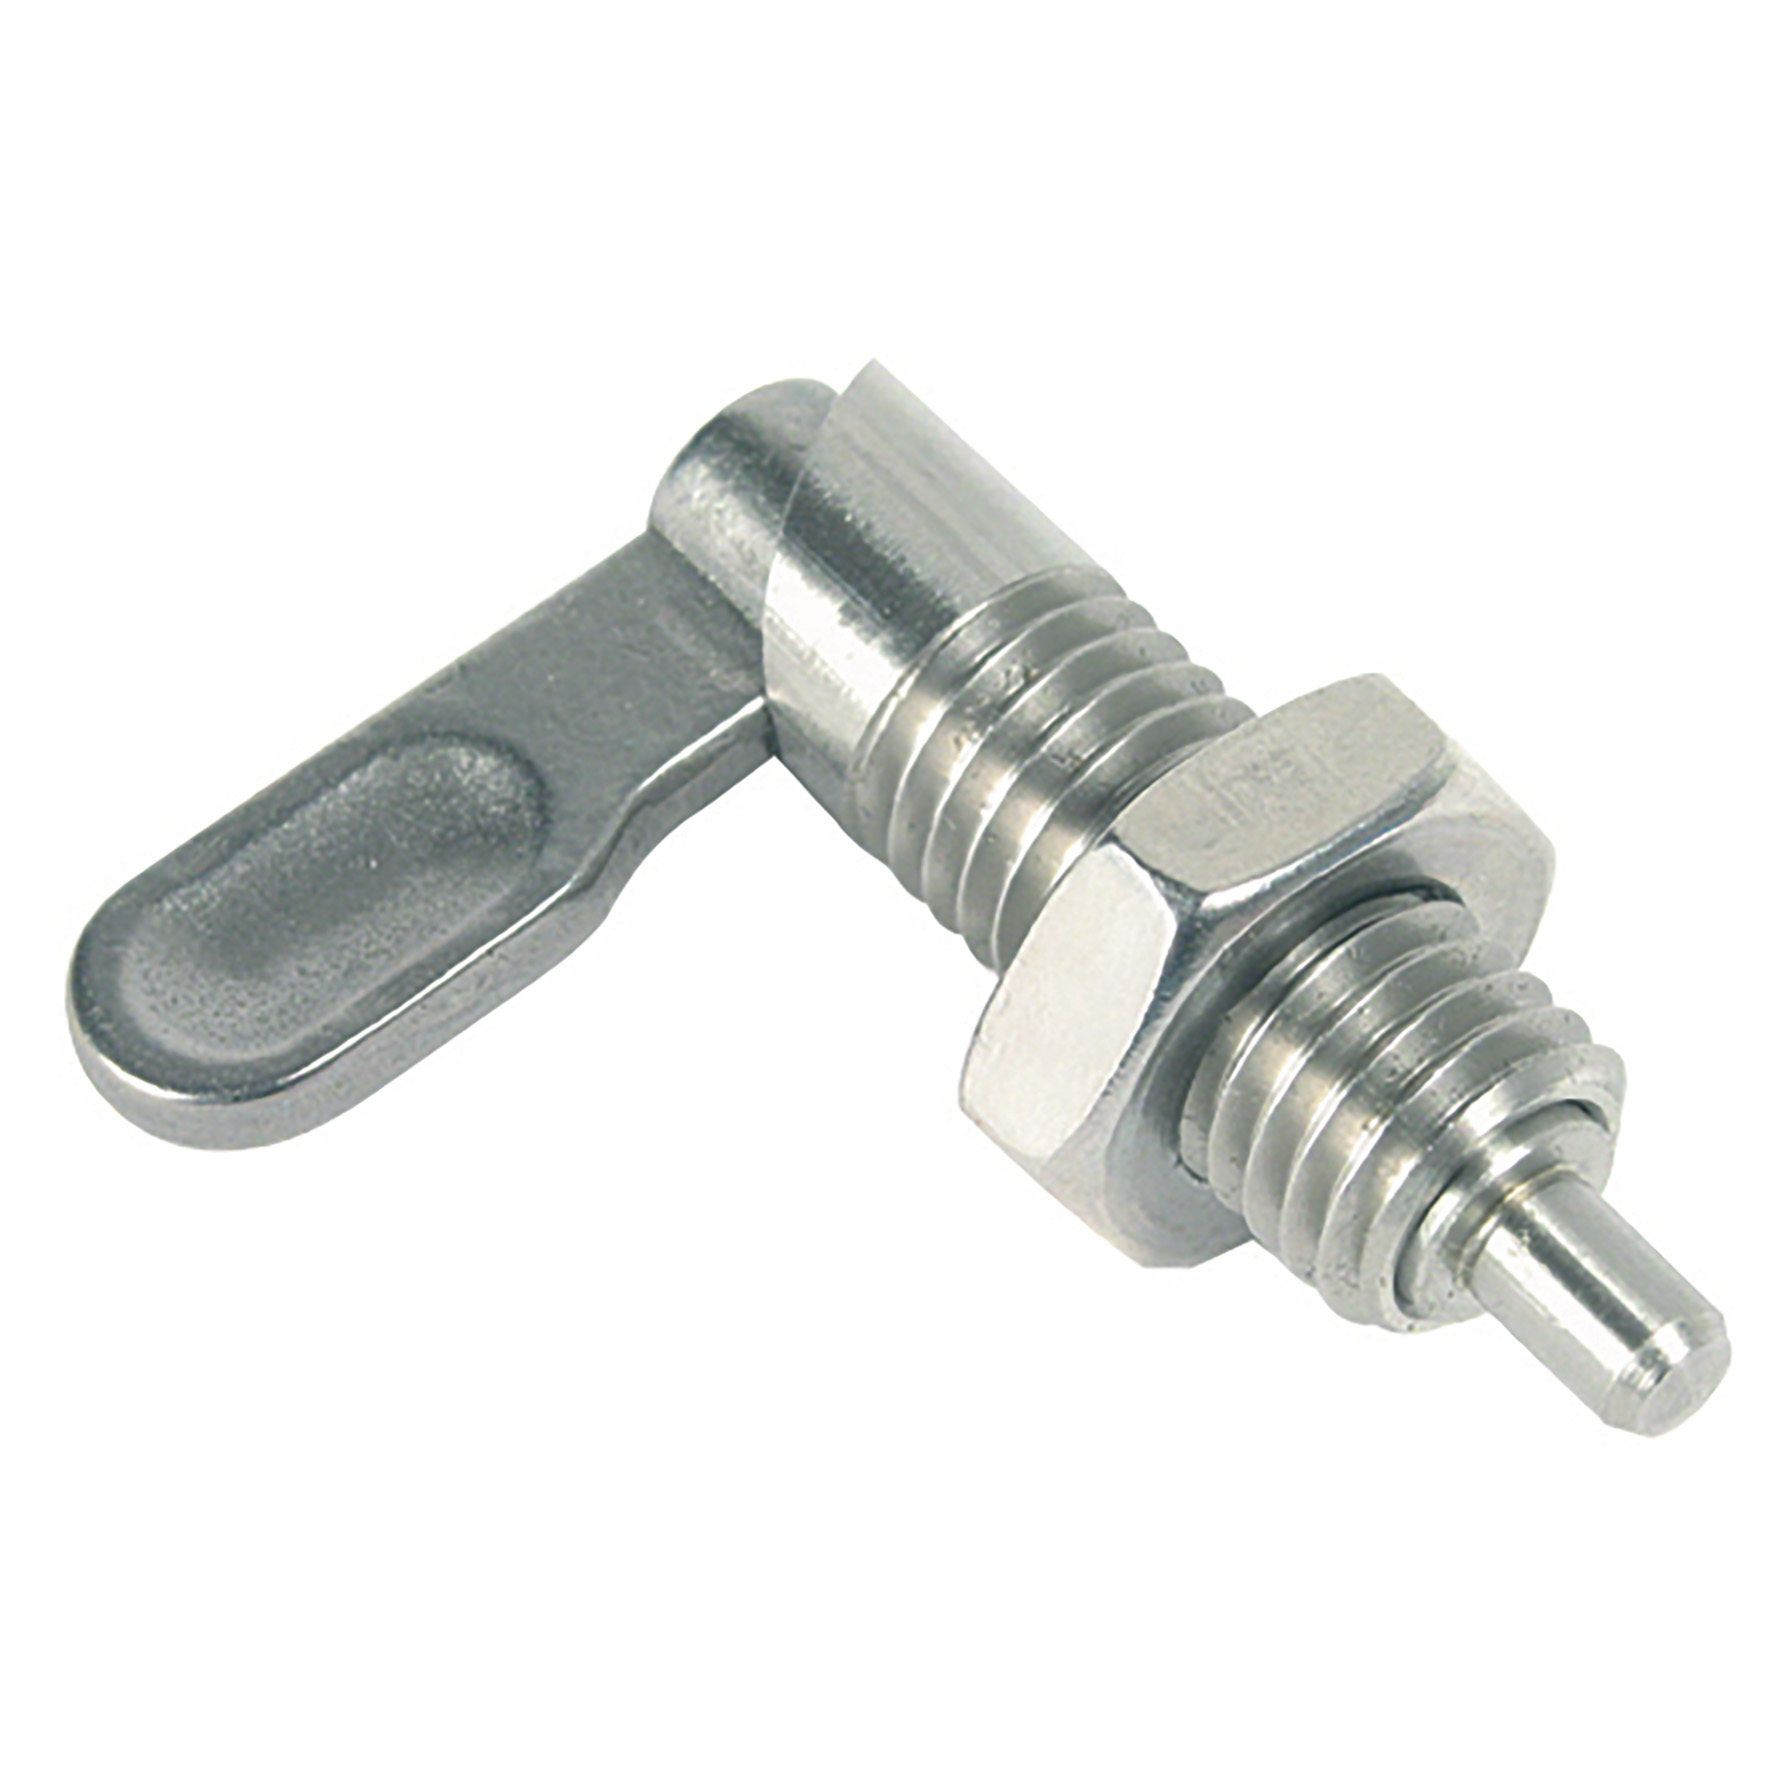 Stainless steel locking bolt - With grip - Stainless steel - stainless steel - 